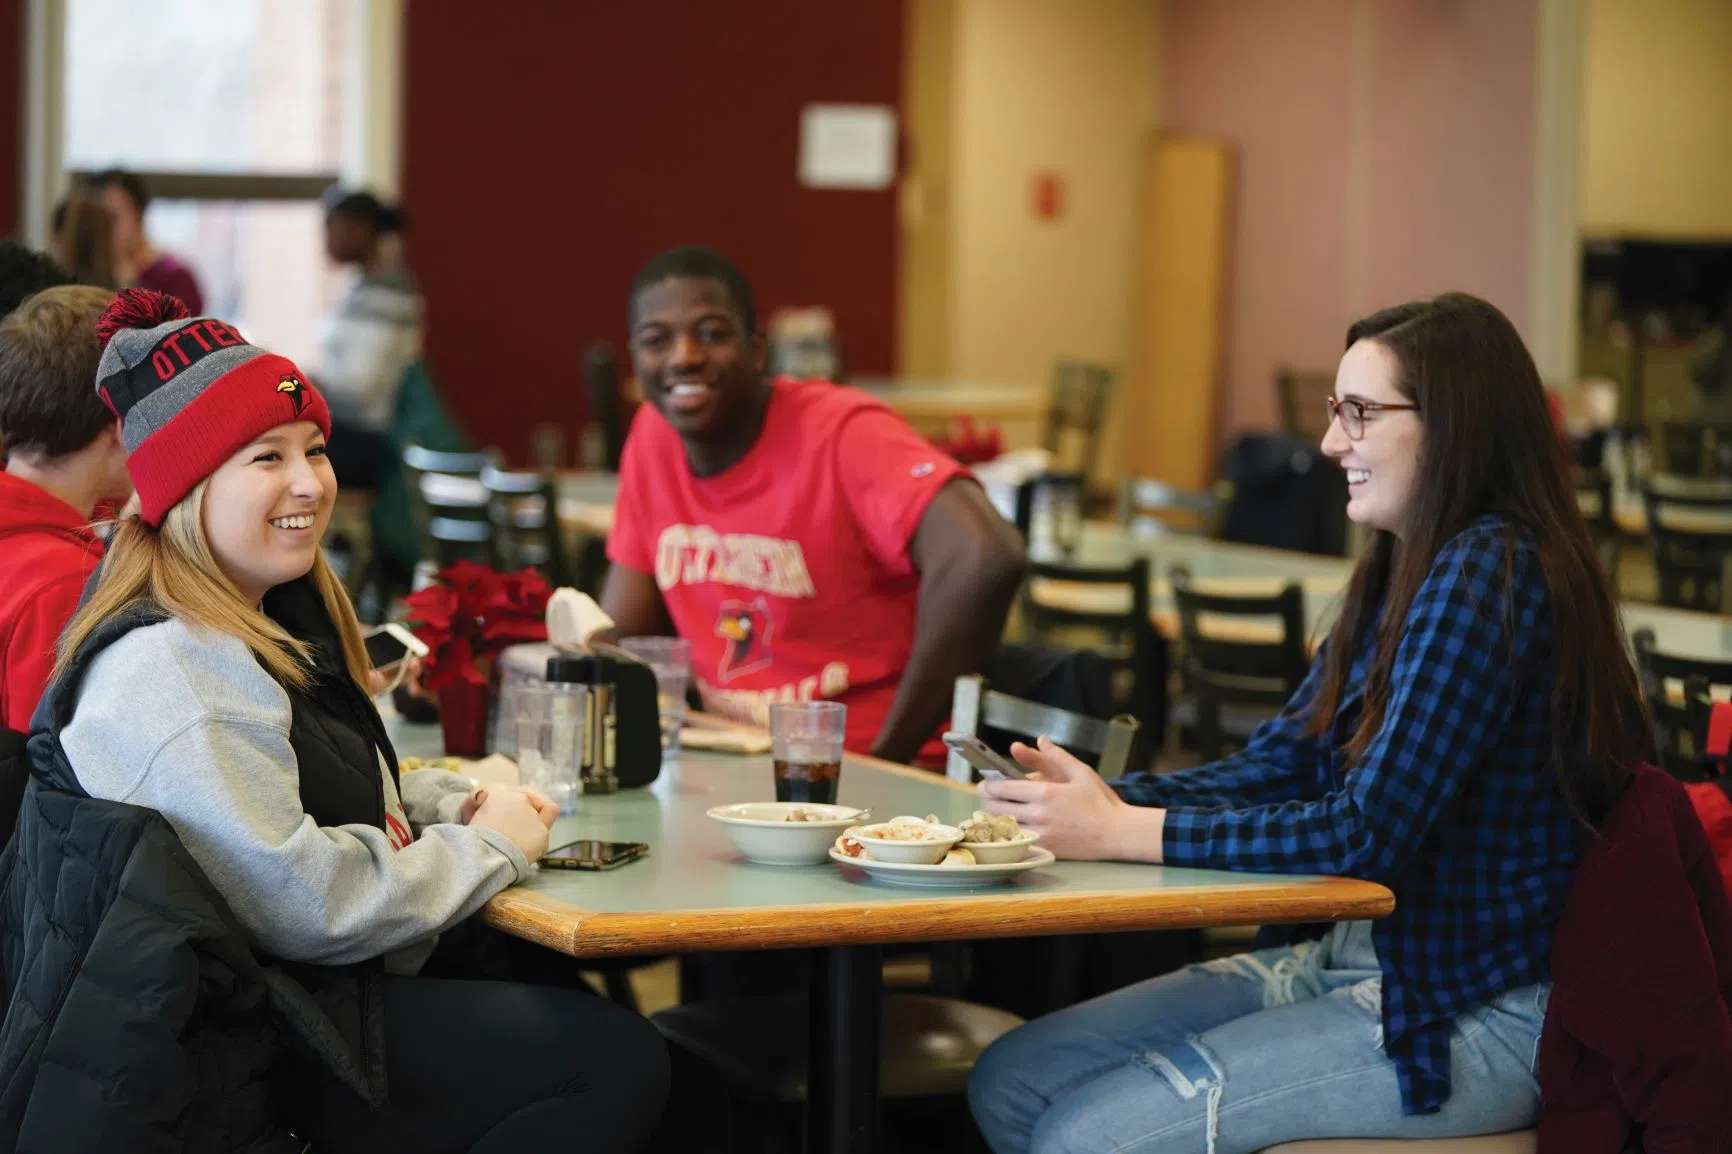 Otterbein students have a fun conversation at one of many tables at the Cardinal's Nest.